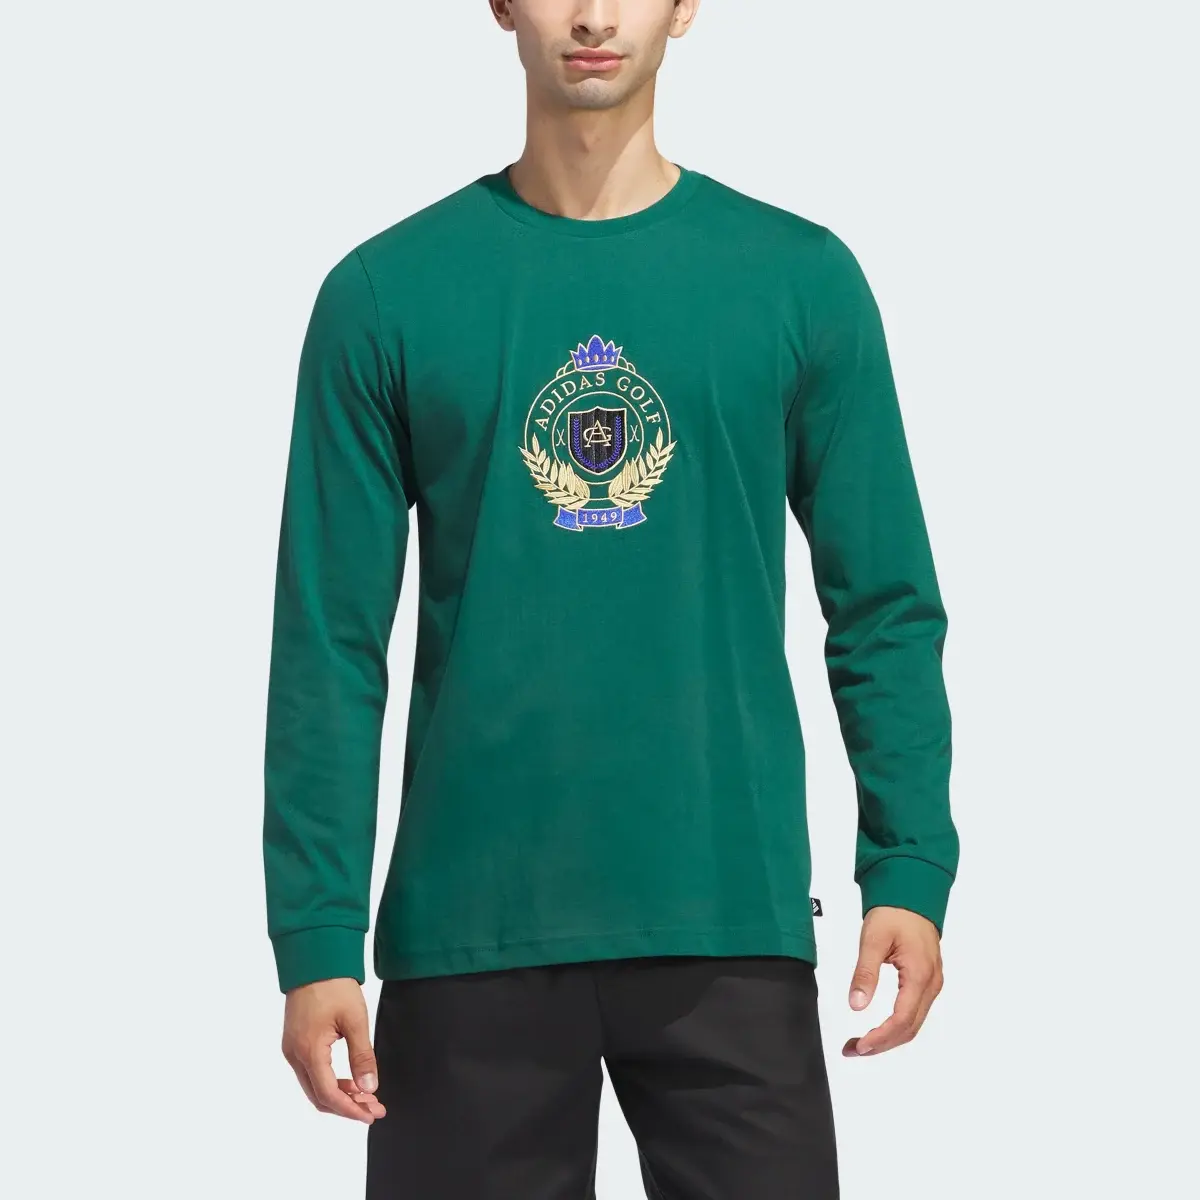 Adidas Go-To Crest Graphic Long Sleeve Tee. 1